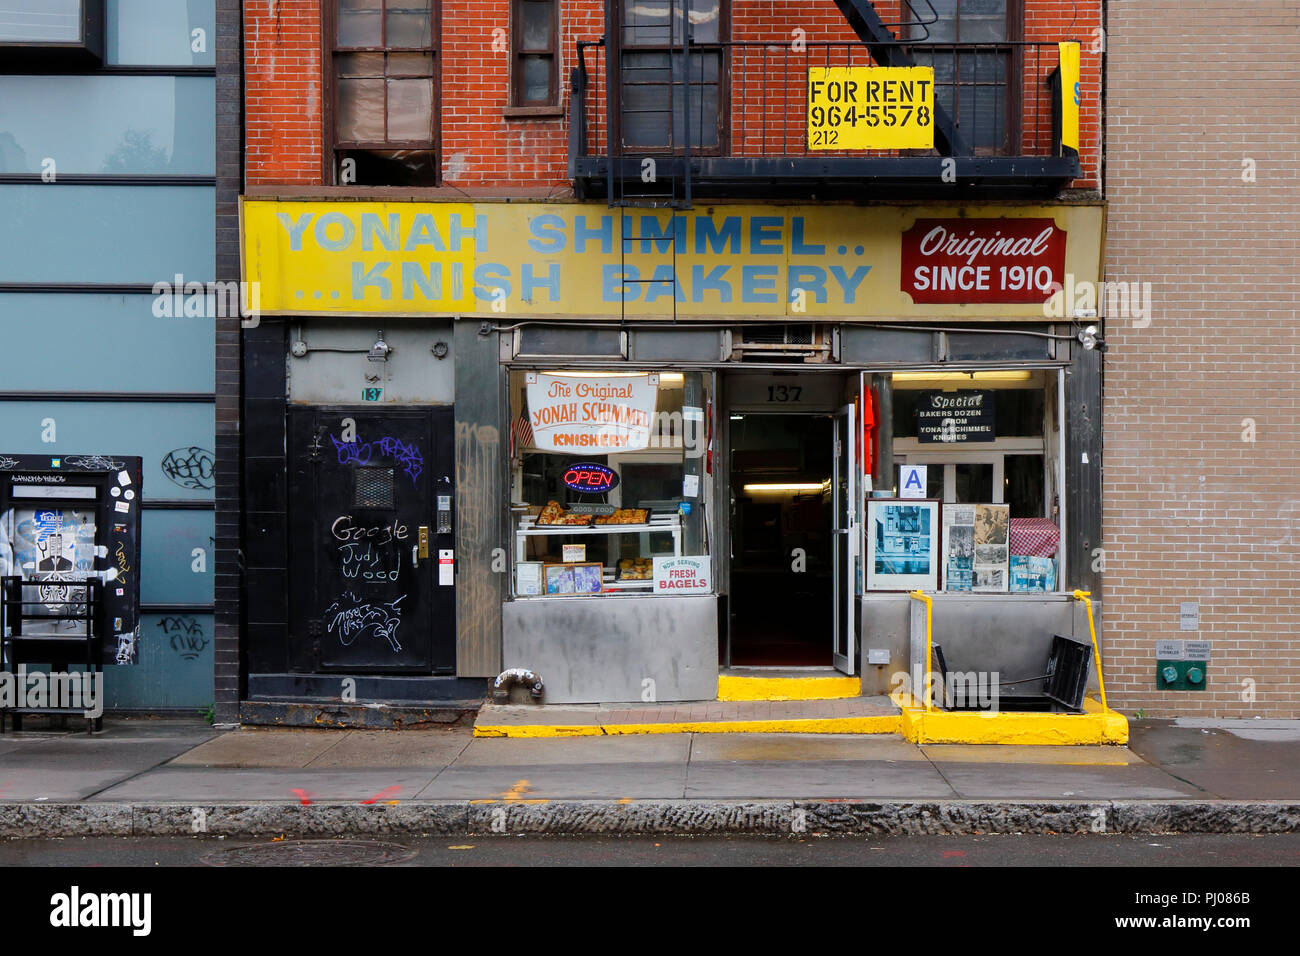 Yonah Schimmel Knish Bakery, 137 E Houston St, New York, NY. exterior storefront of a jewish bakery in the Lower East Side neighborhood of Manhattan. Stock Photo